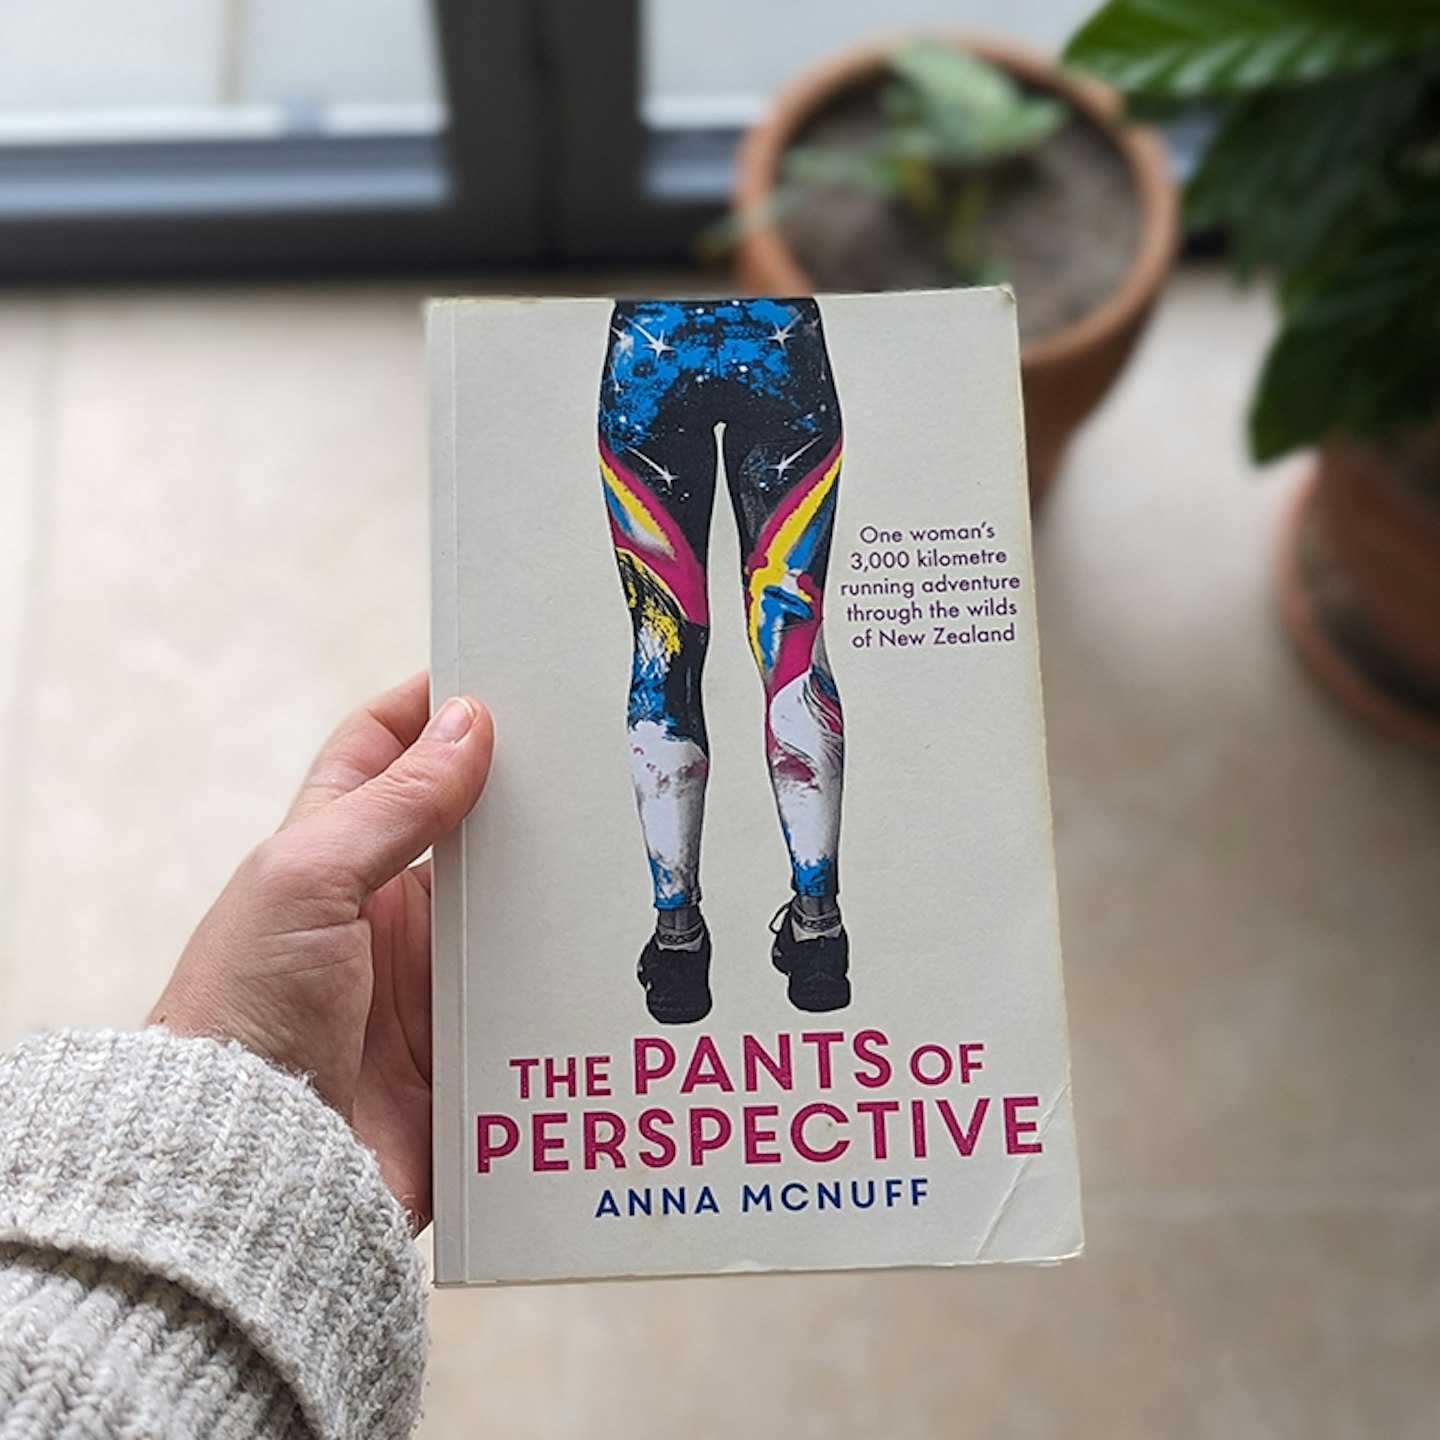 The Pants of Perspective book by Anna McNuff